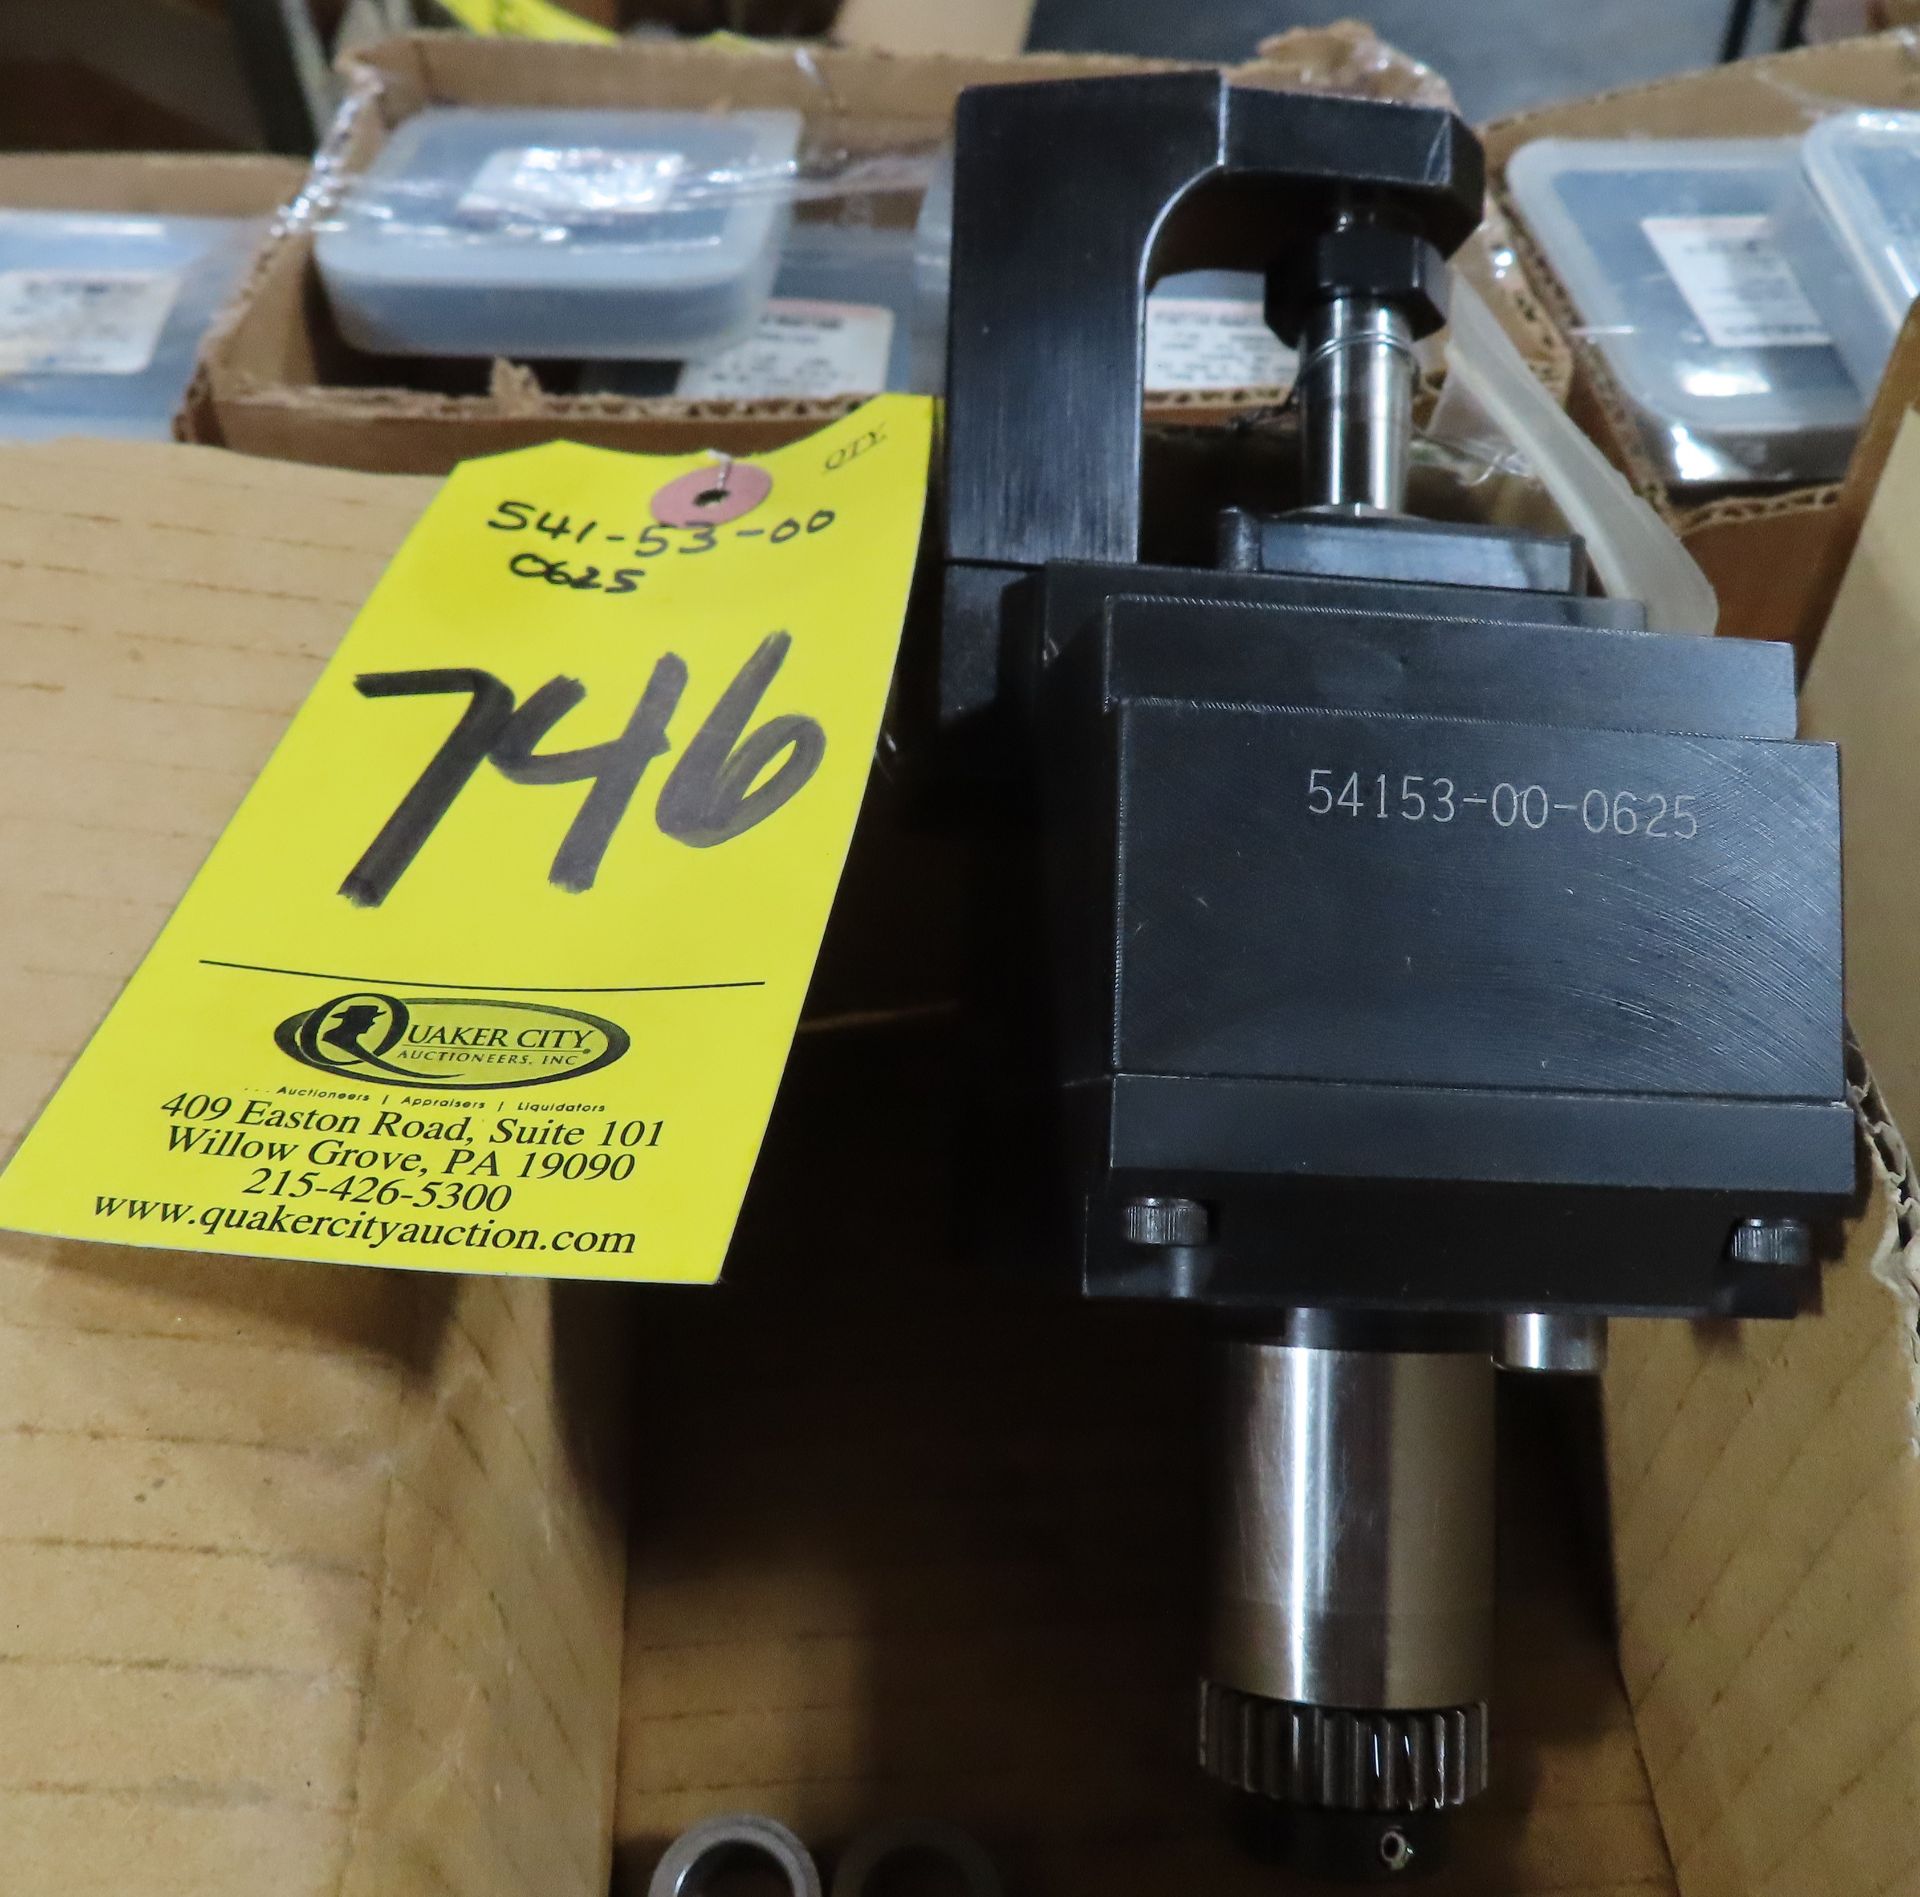 STAR 541-53-00, S/N 0625, LIVE SLOTTING/2-SIDE MILLING TOOL, SAW INCLUDED - Image 5 of 5